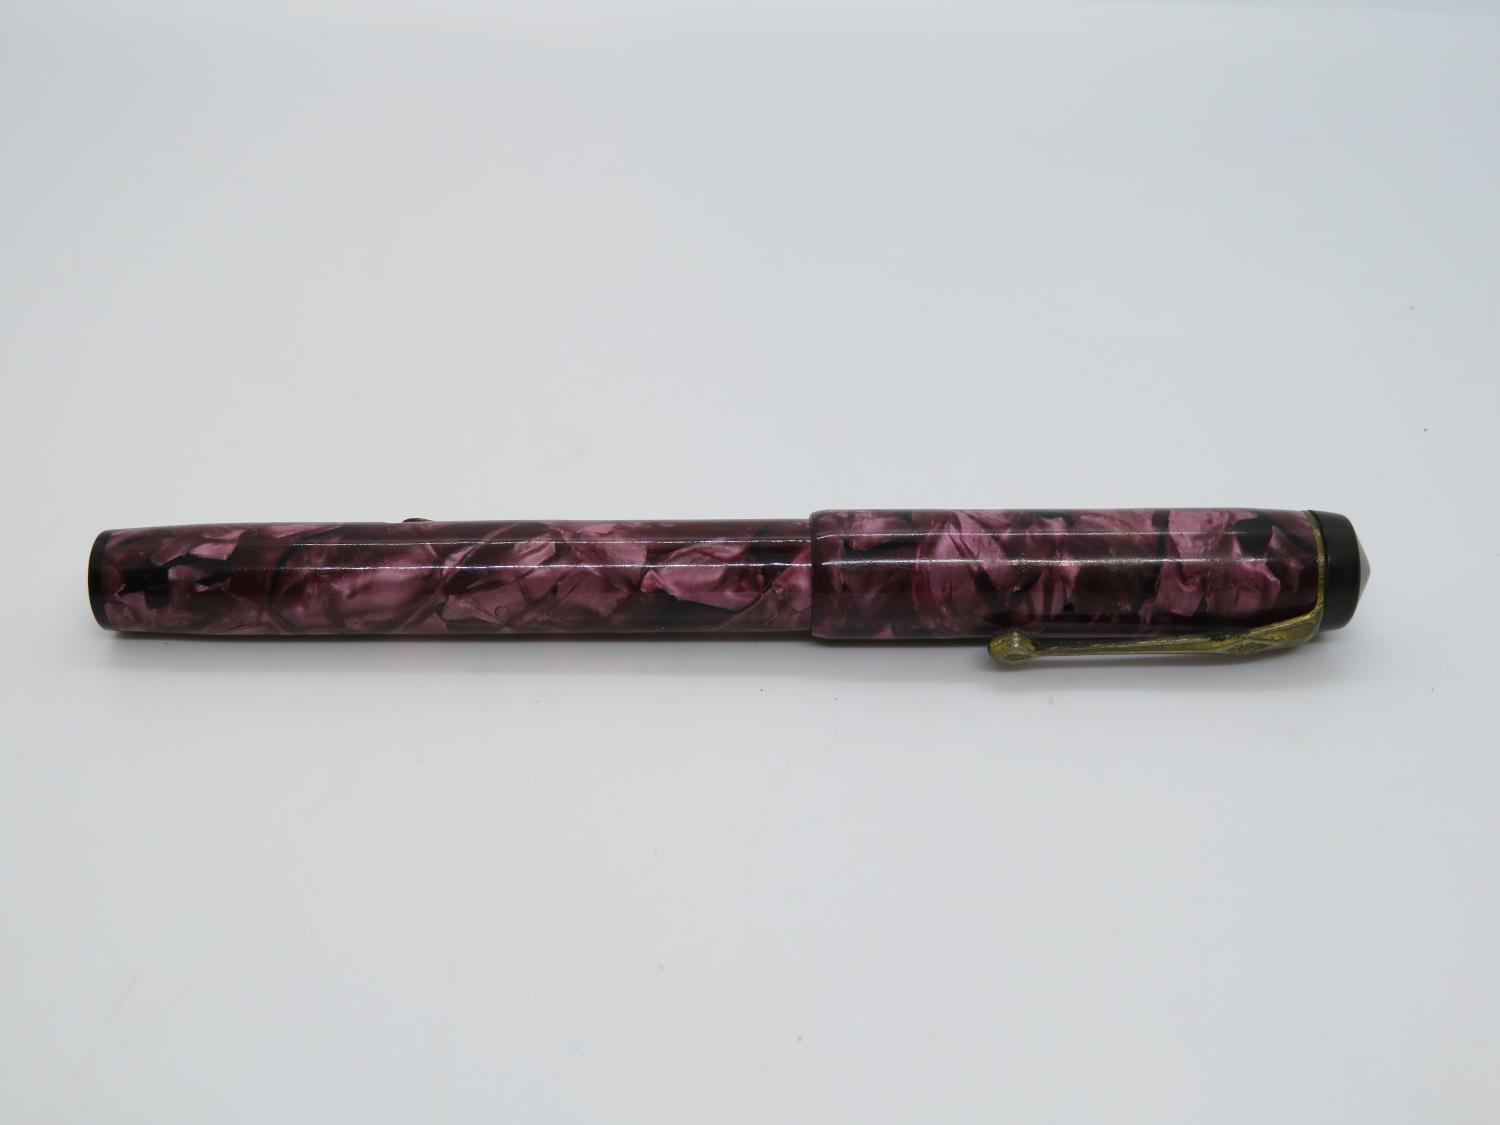 Rose marbled spare or repair Conway Stewart 475 fountain pen 14ct nib - Image 3 of 3